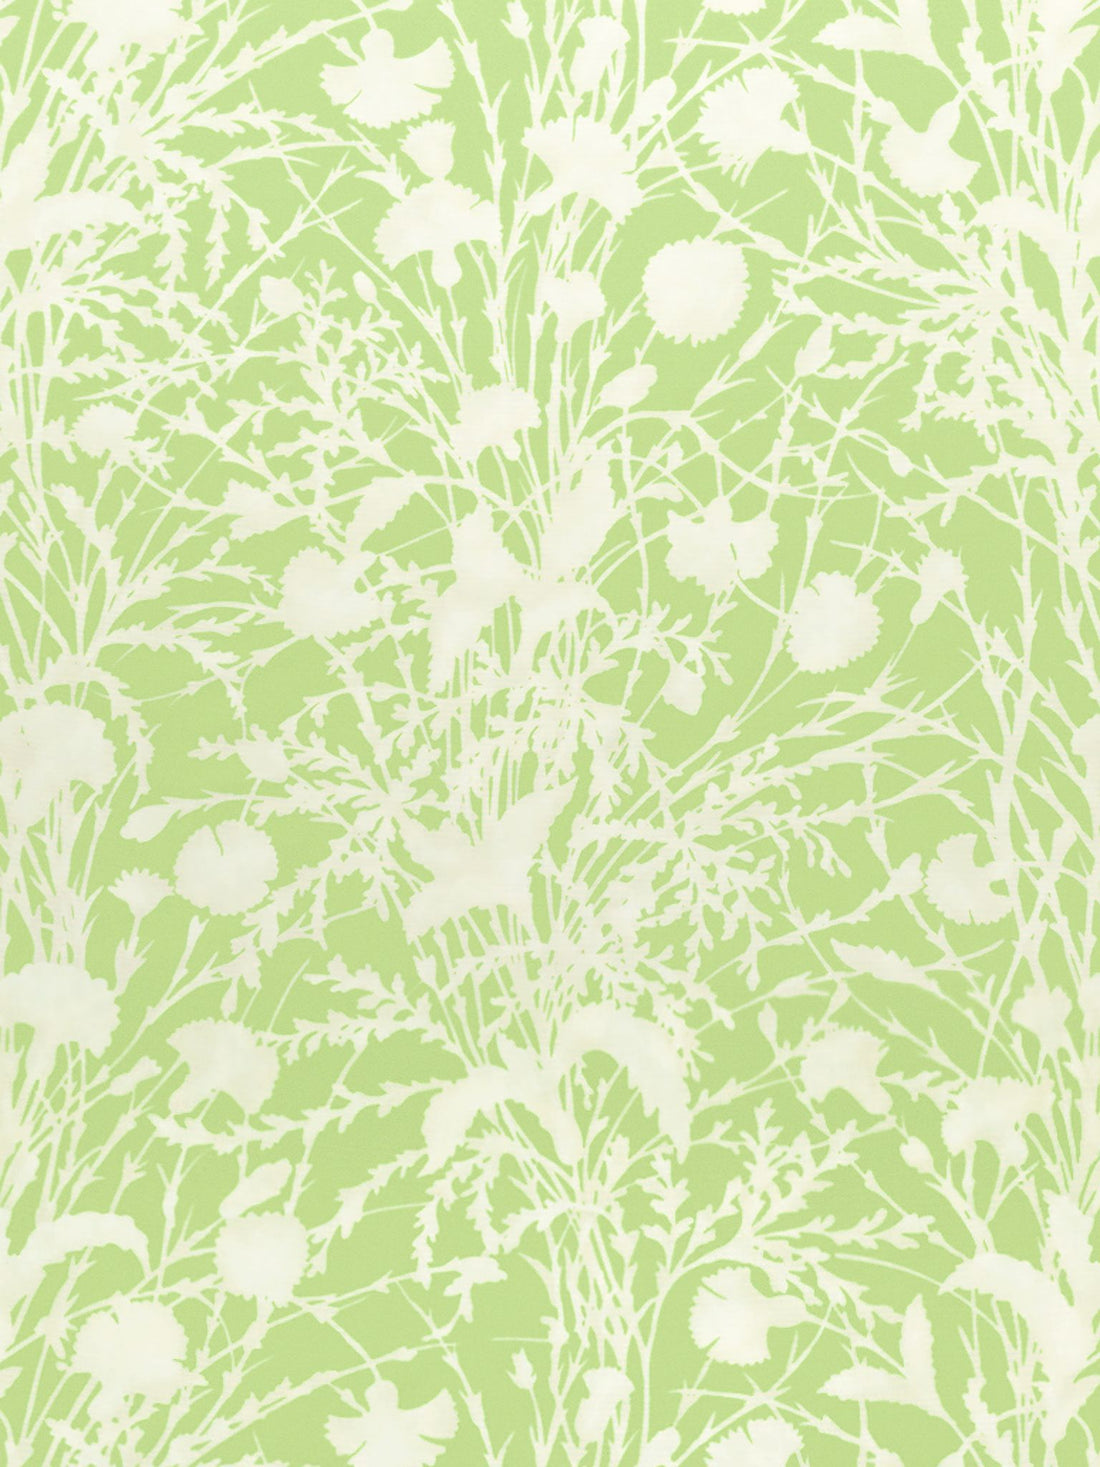 Wildflower fabric in grasshopper color - pattern number GW 000316623 - by Scalamandre in the Grey Watkins collection